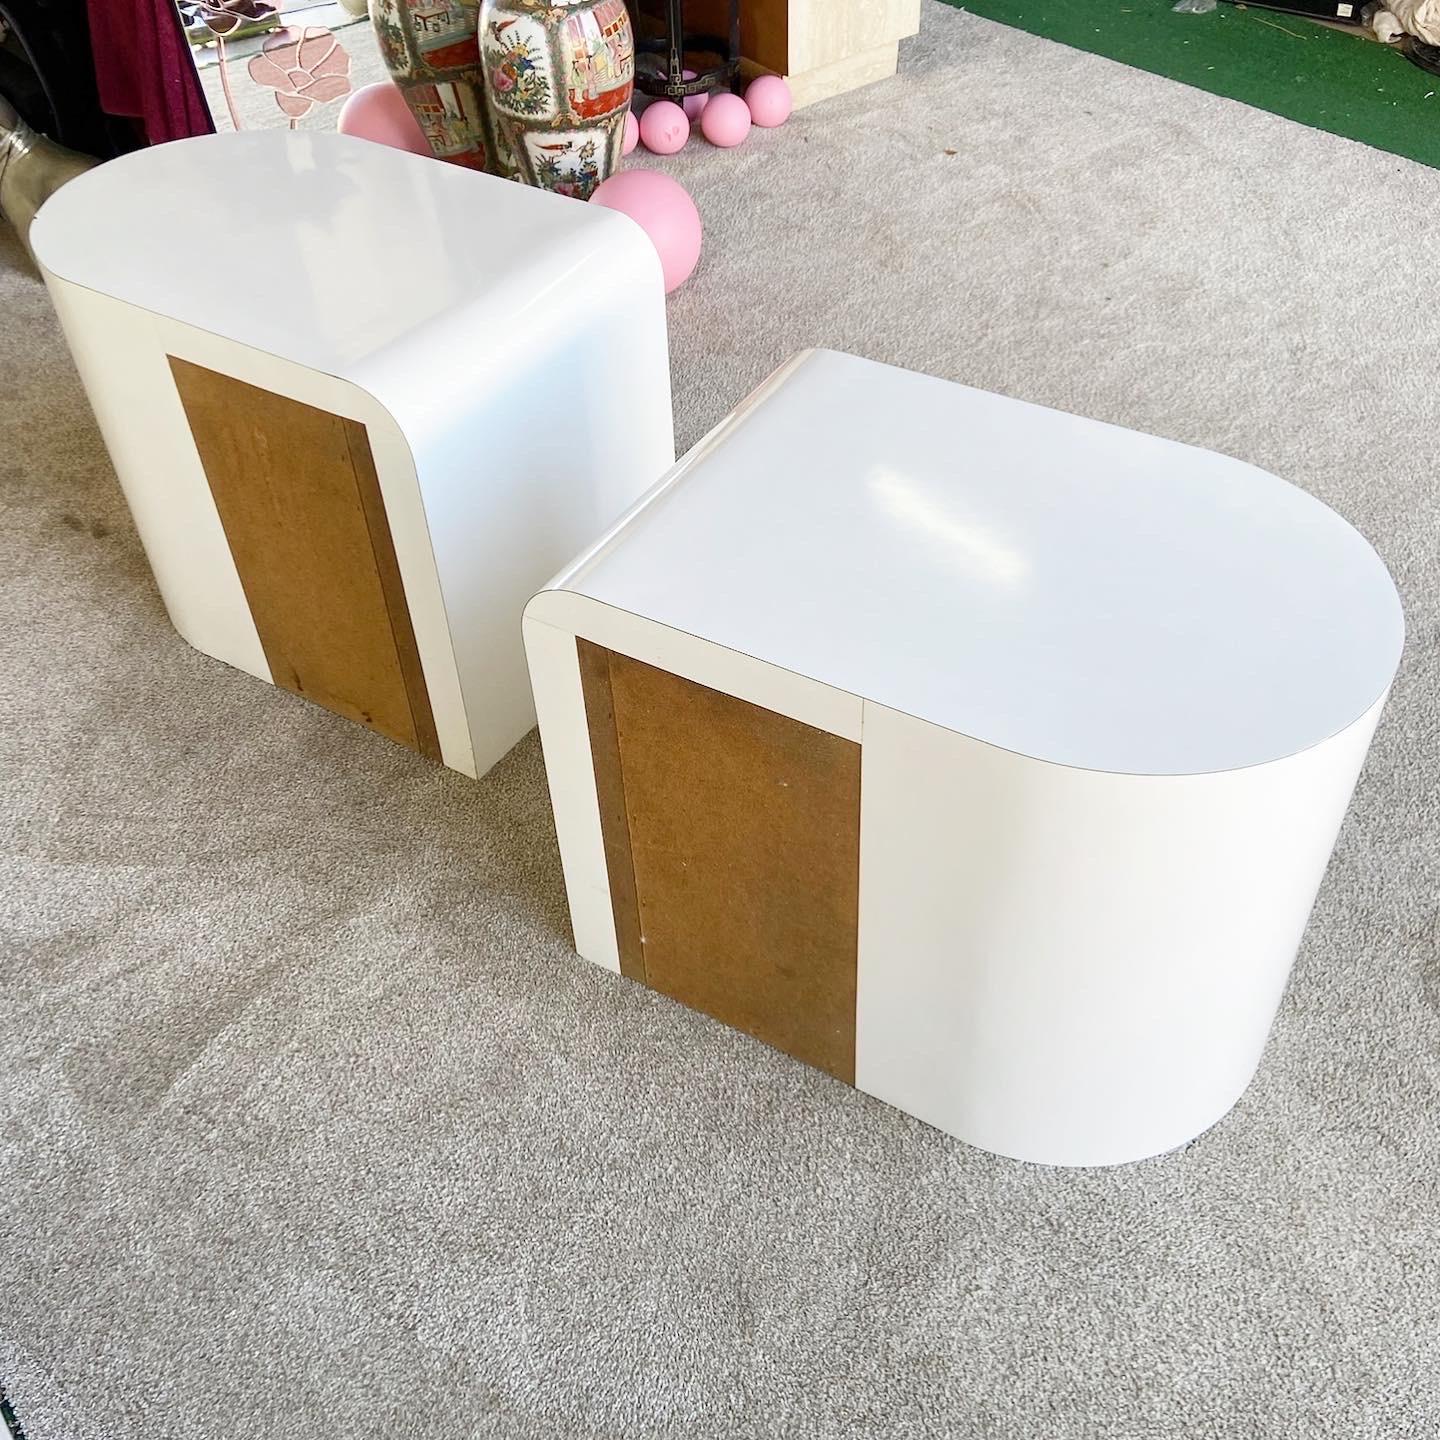 American 1980s Postmodern White and Black Lacquer Laminate Nightstands - a Pair